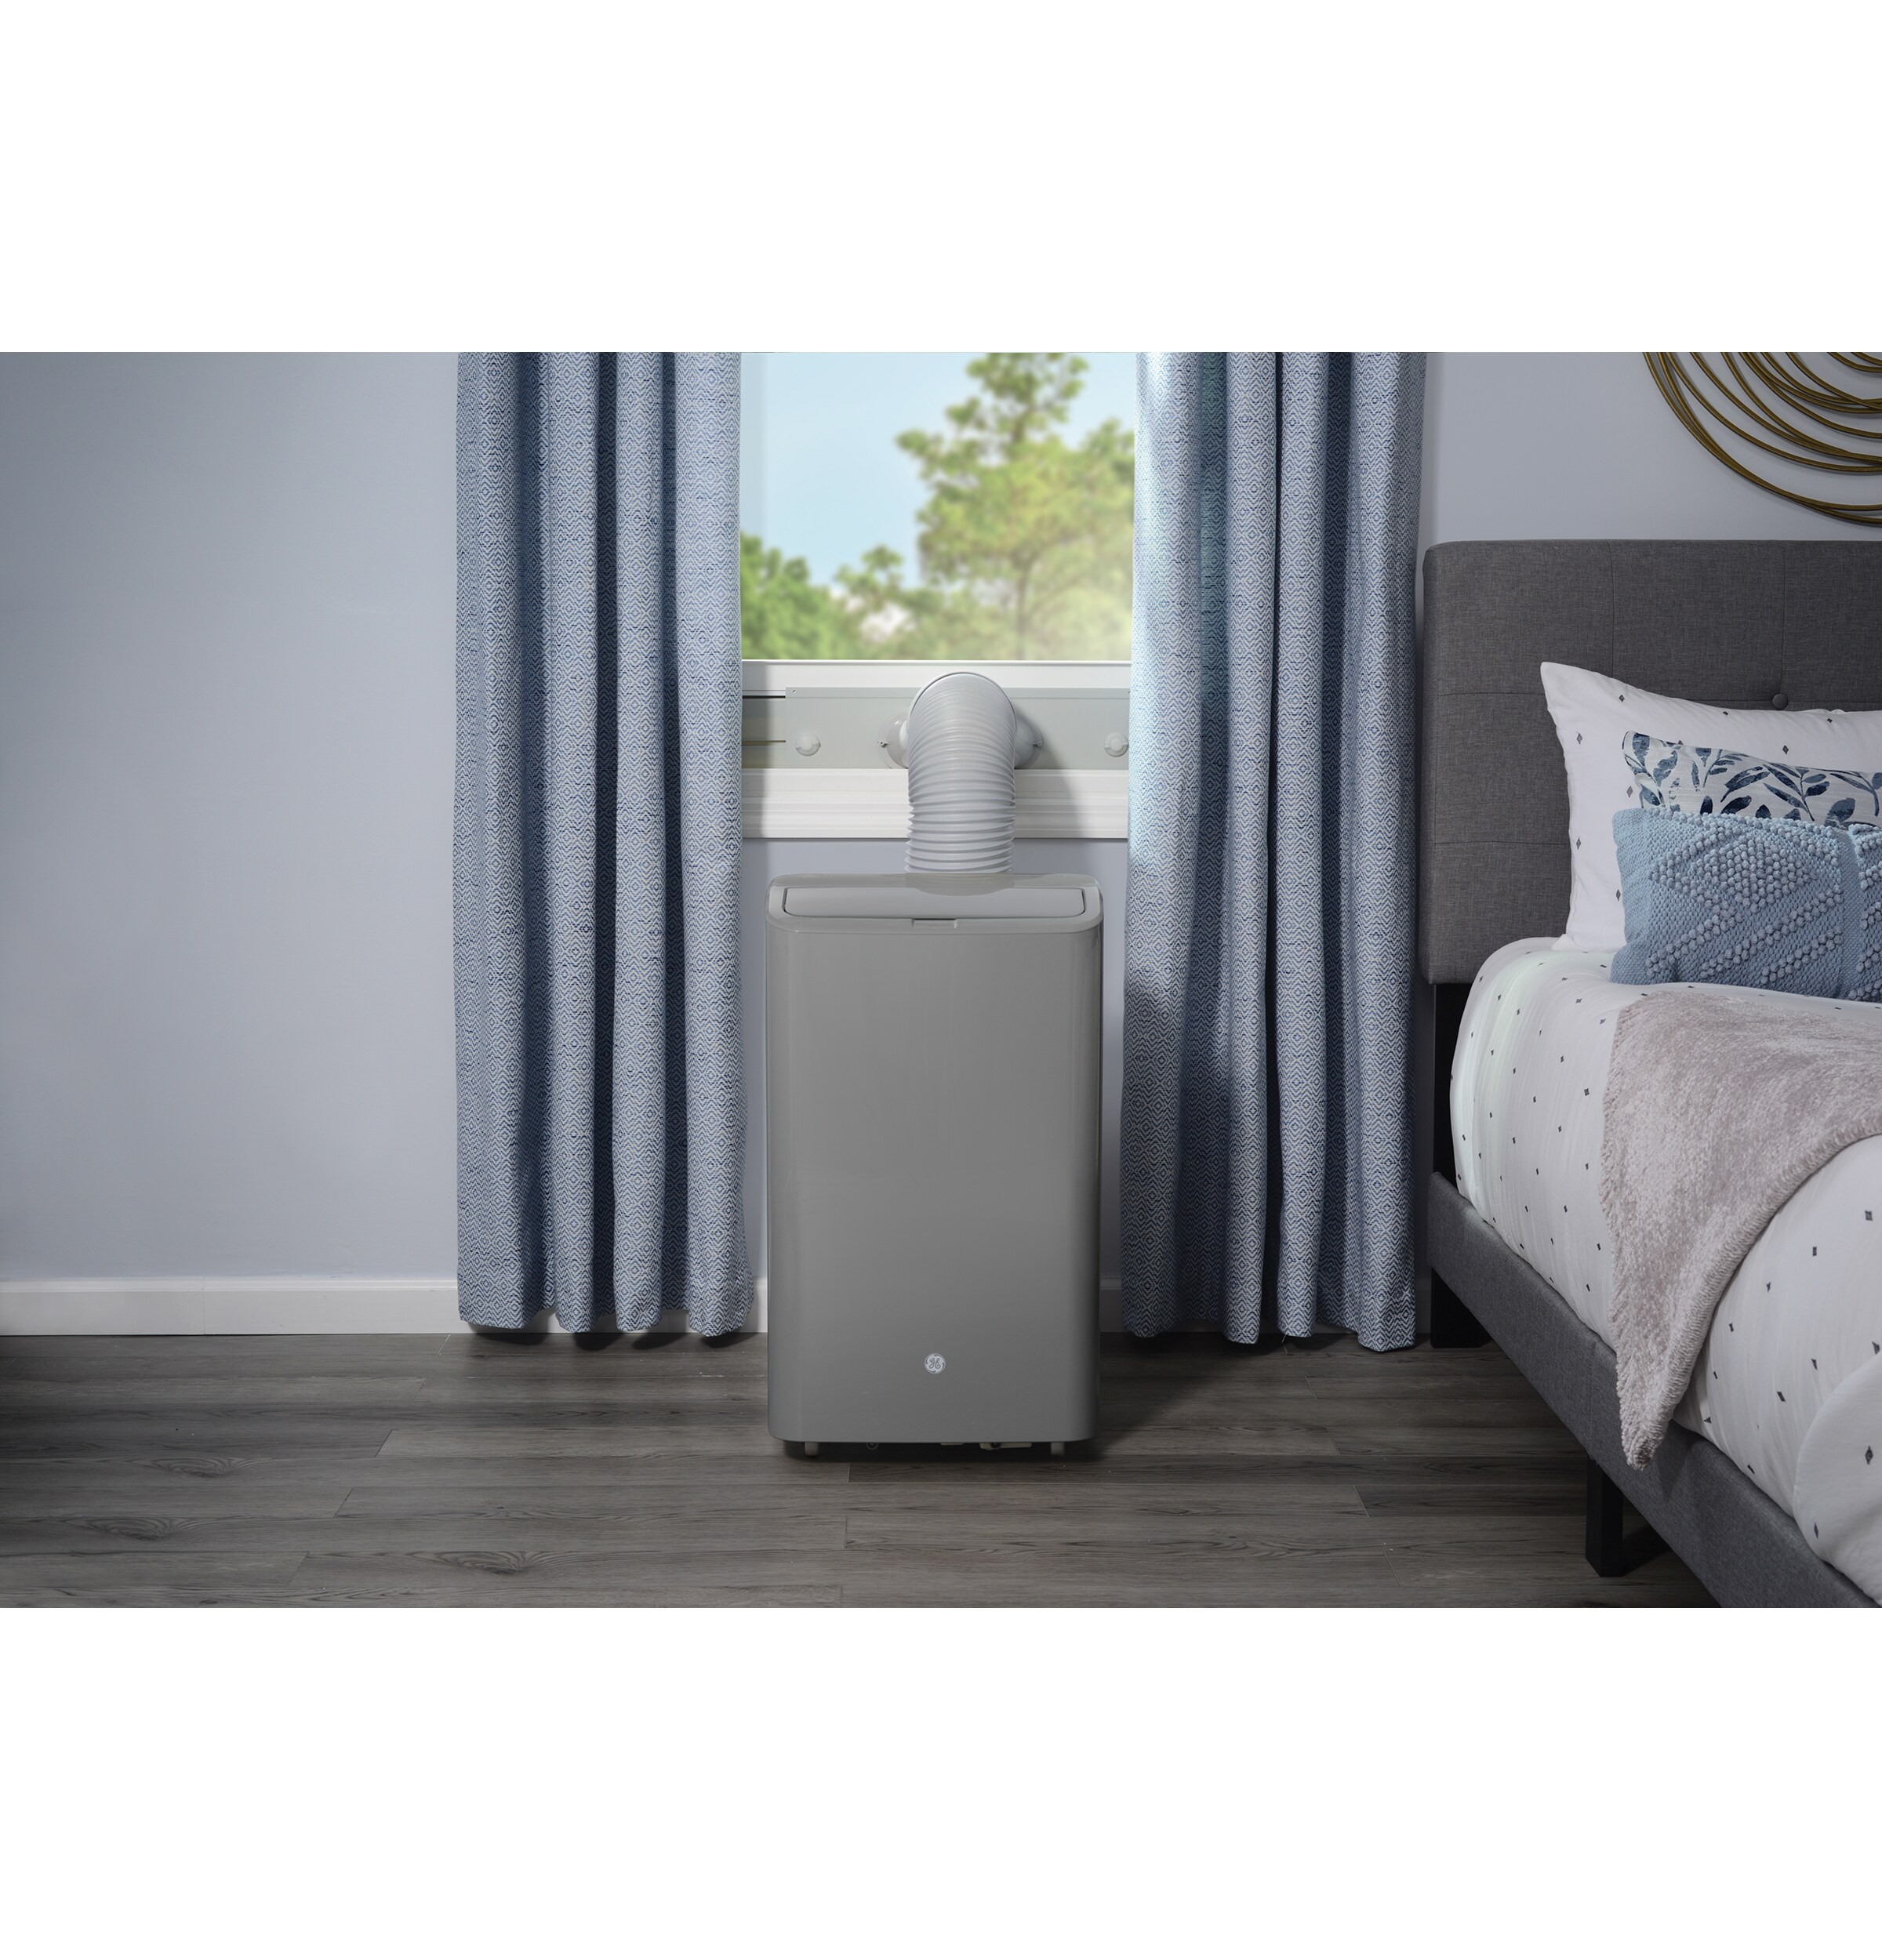 APCD10JASG in Gray by GE Appliances in Key West, FL - GE® 10,500 BTU  Portable Air Conditioner with Dehumidifier and Remote, Grey